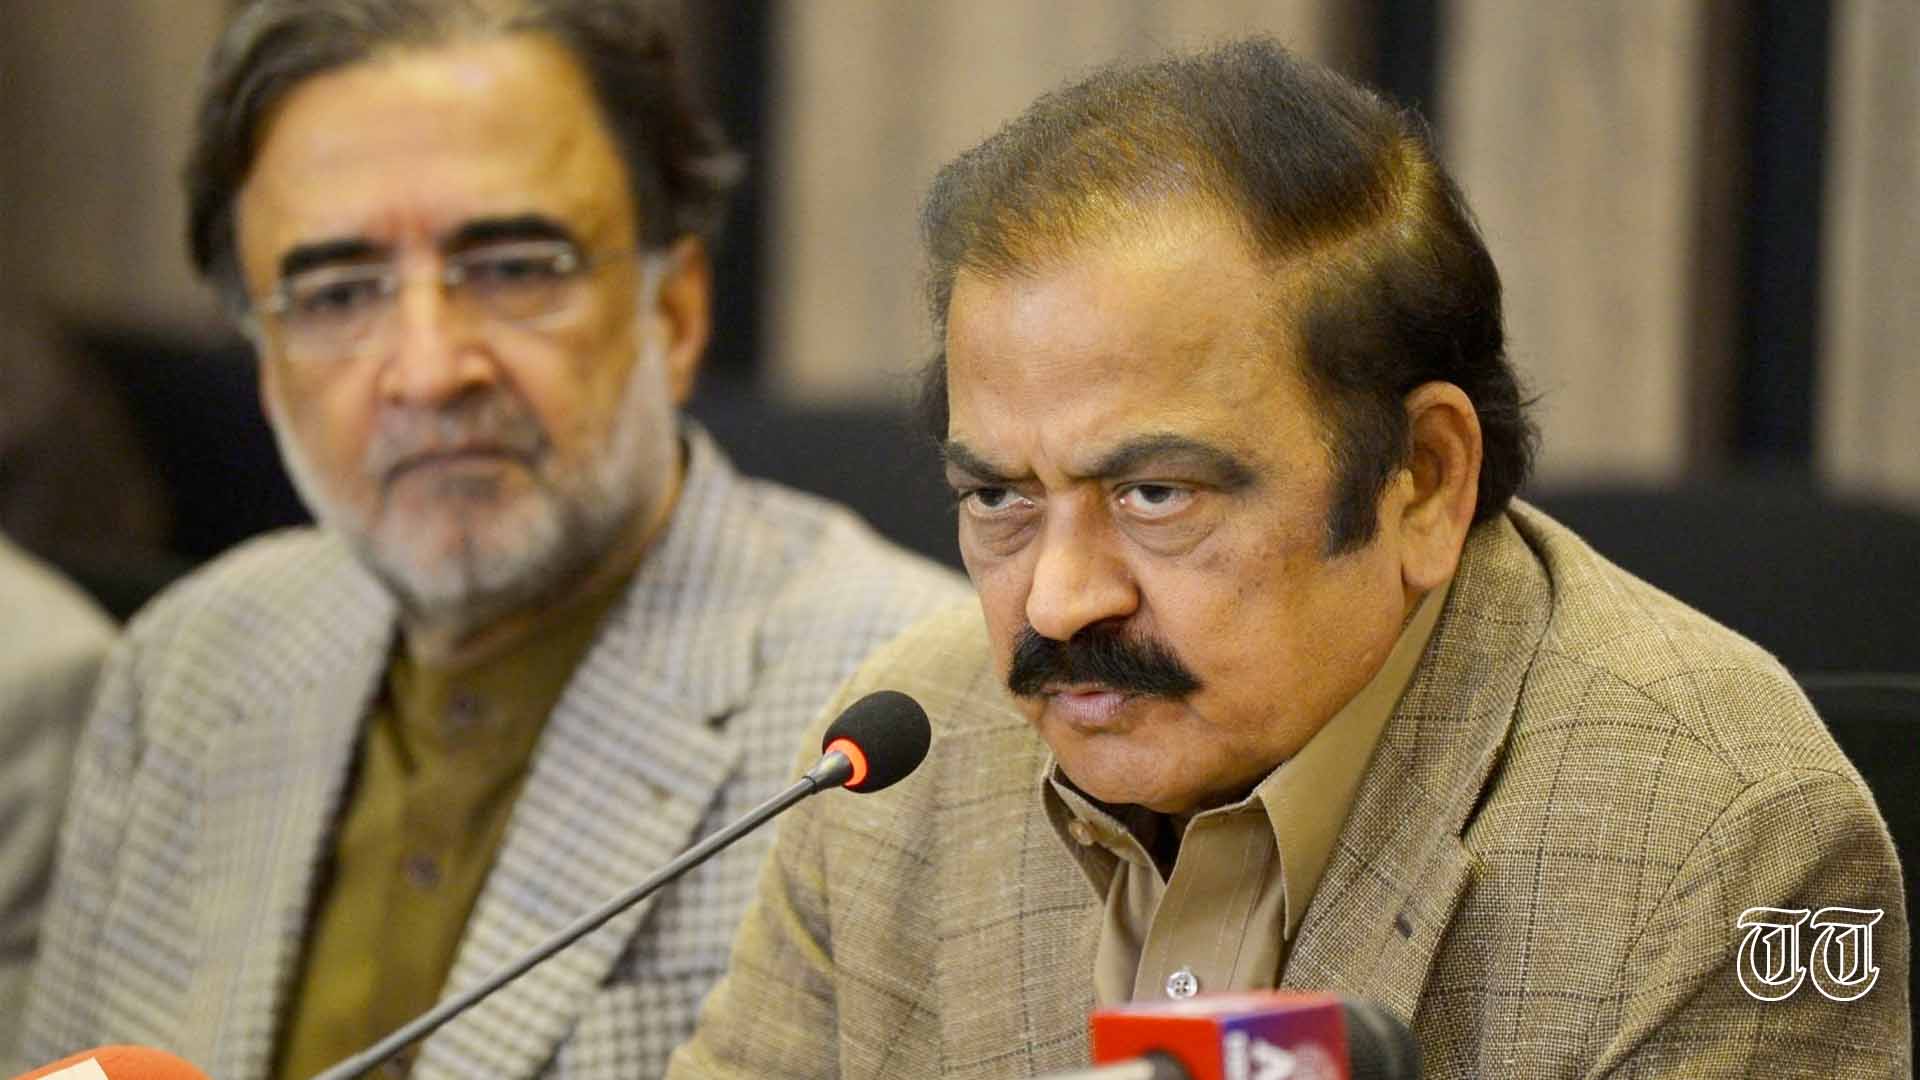 A file photo is shown of interior minister Rana Sanaullah.